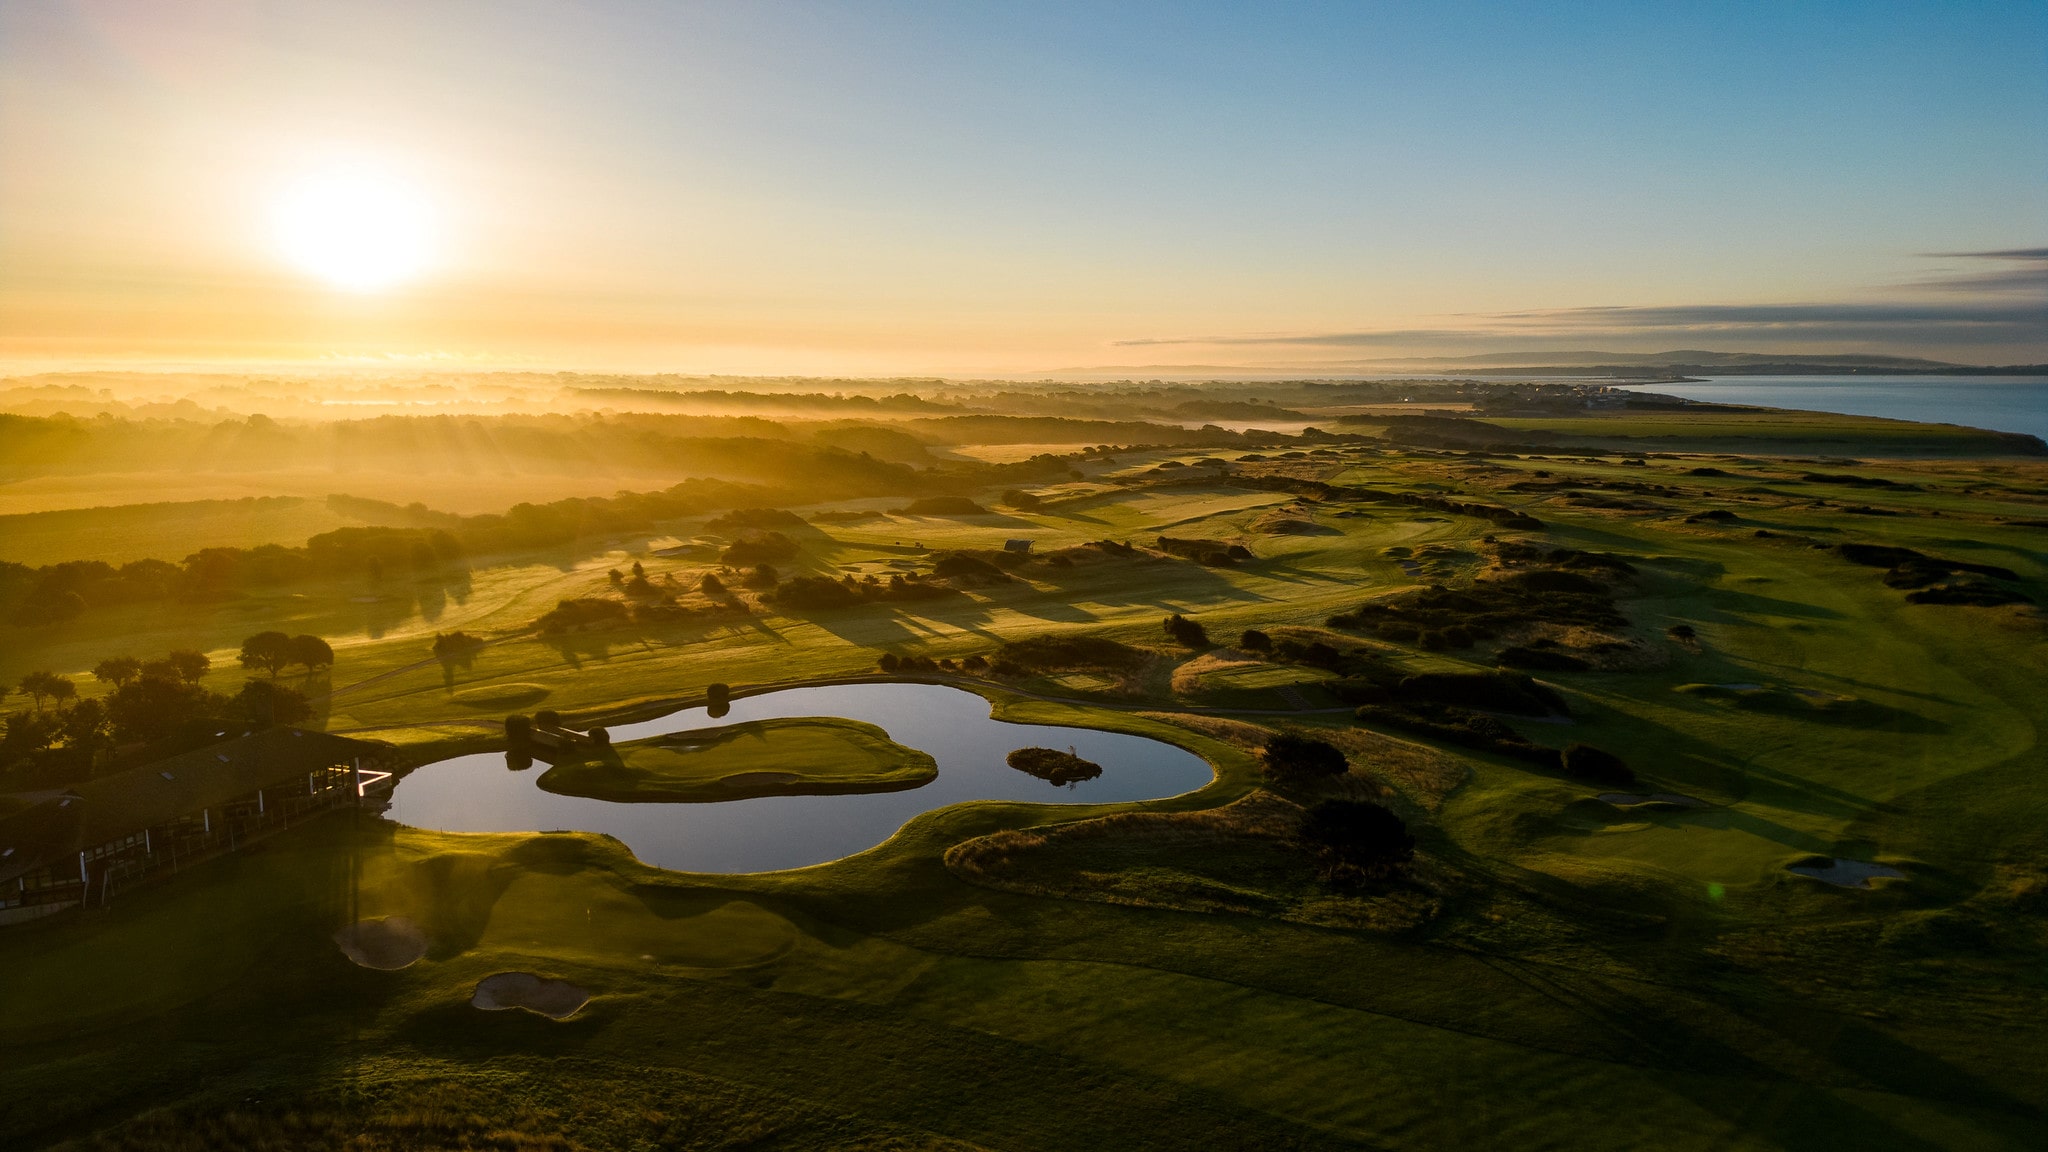 An aerial shot of Barton-on-Sea golf club, with a large water hazard lake being the focal point.